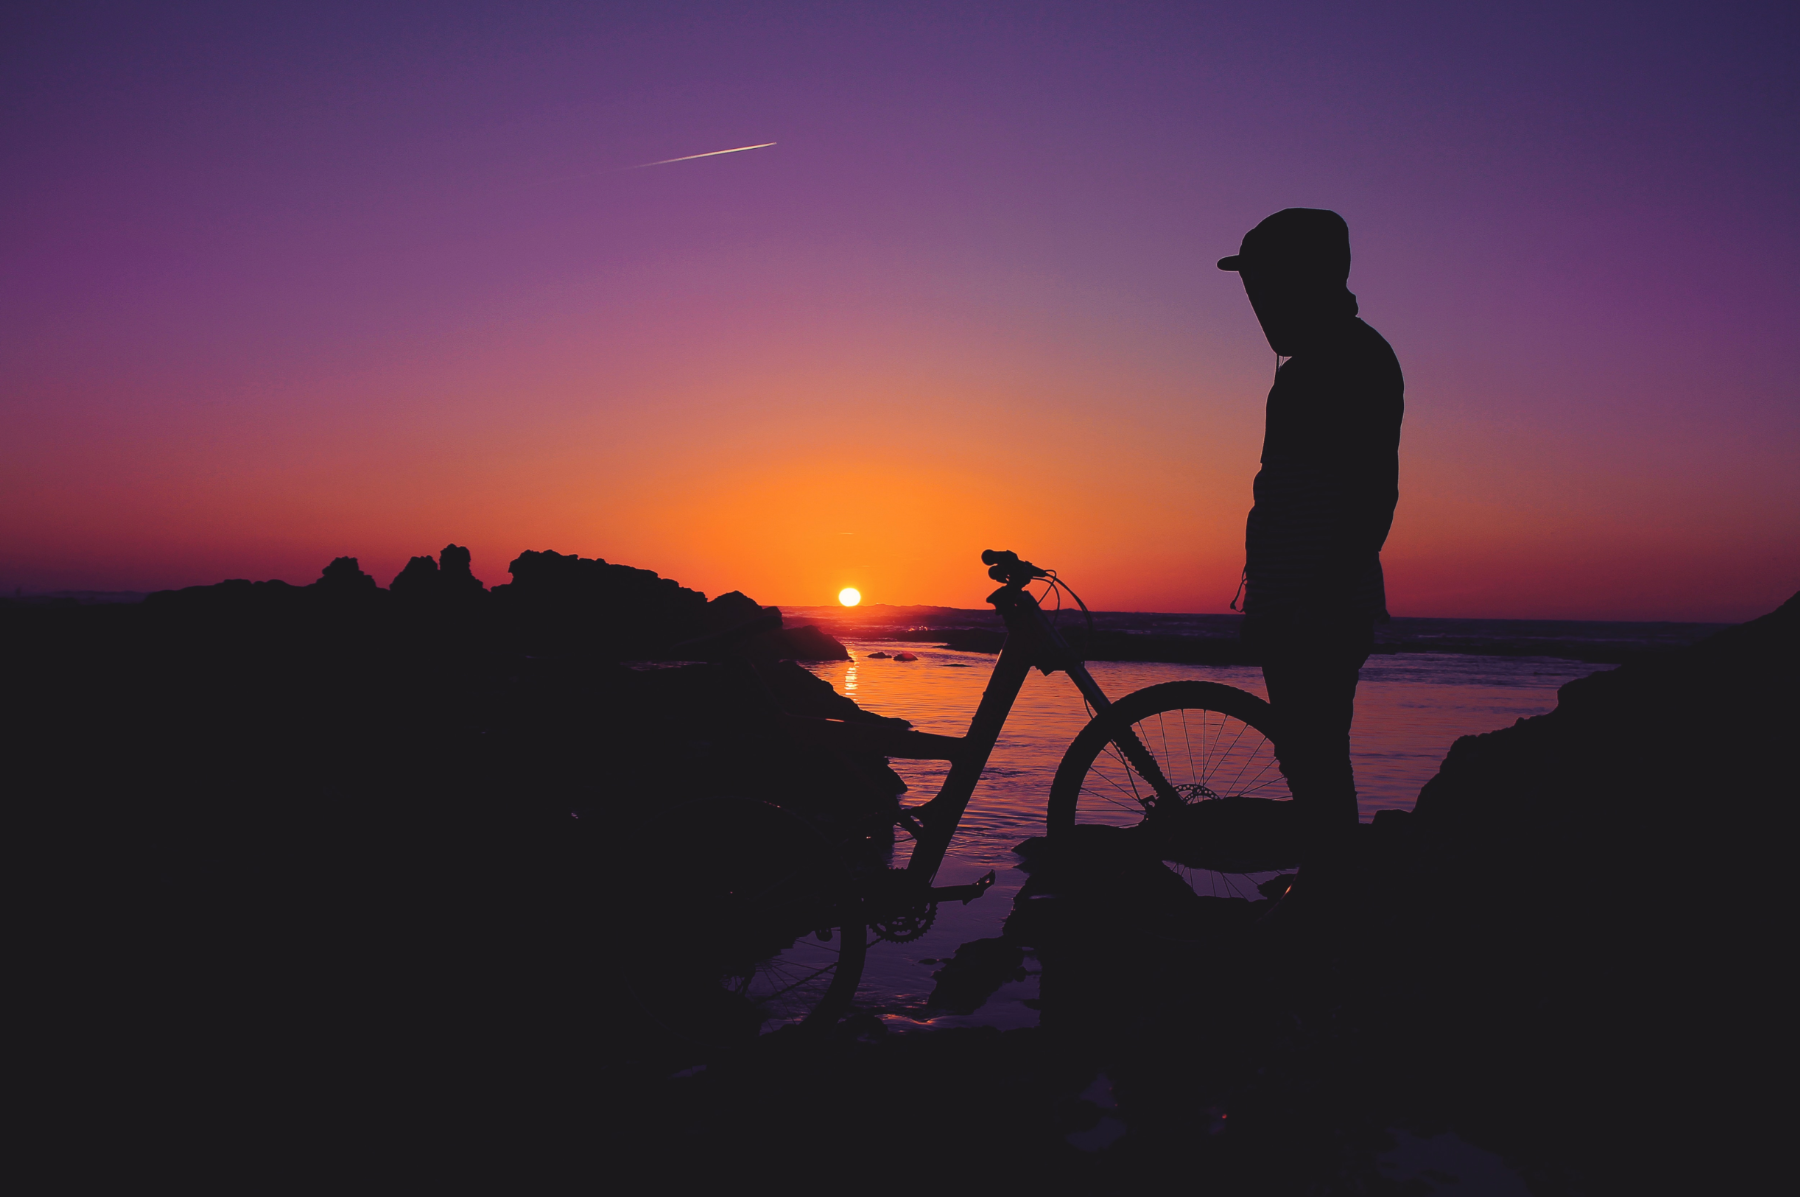 Admiring the sunset with a bicycle.